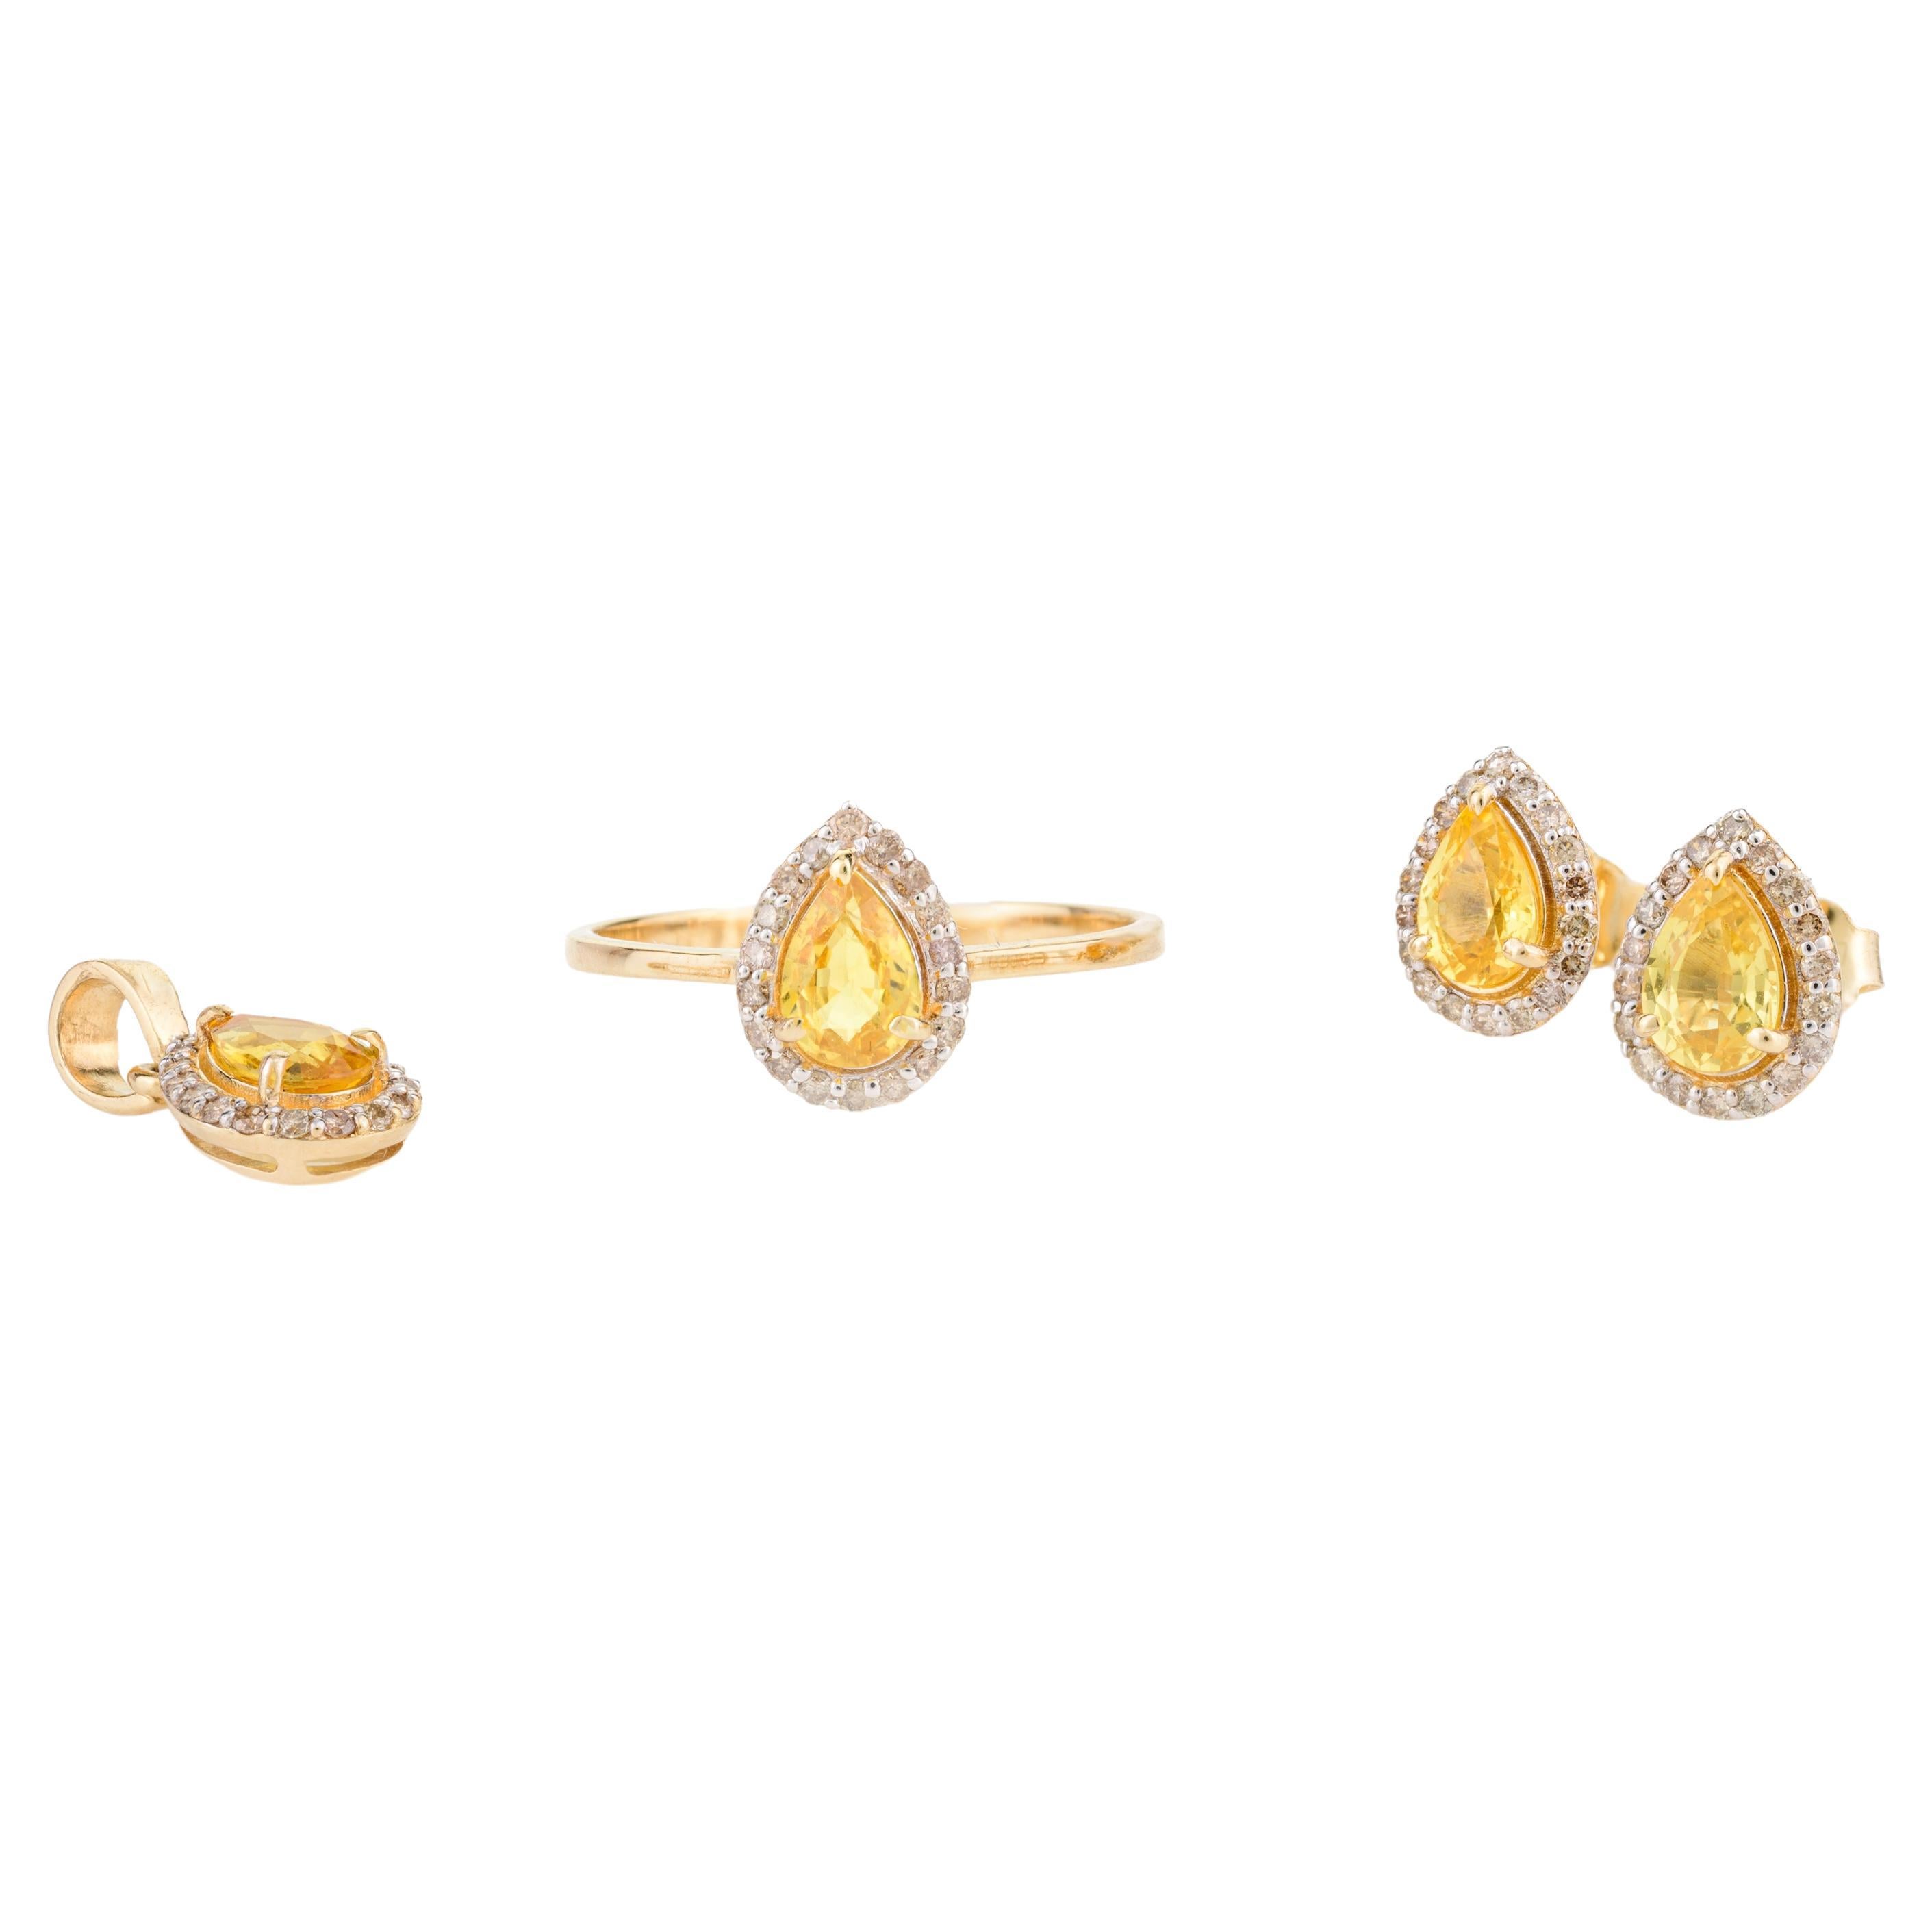 For Sale:  Real Yellow Sapphire Ring, Earrings and Pendant Jewelry Set in 18k Yellow Gold